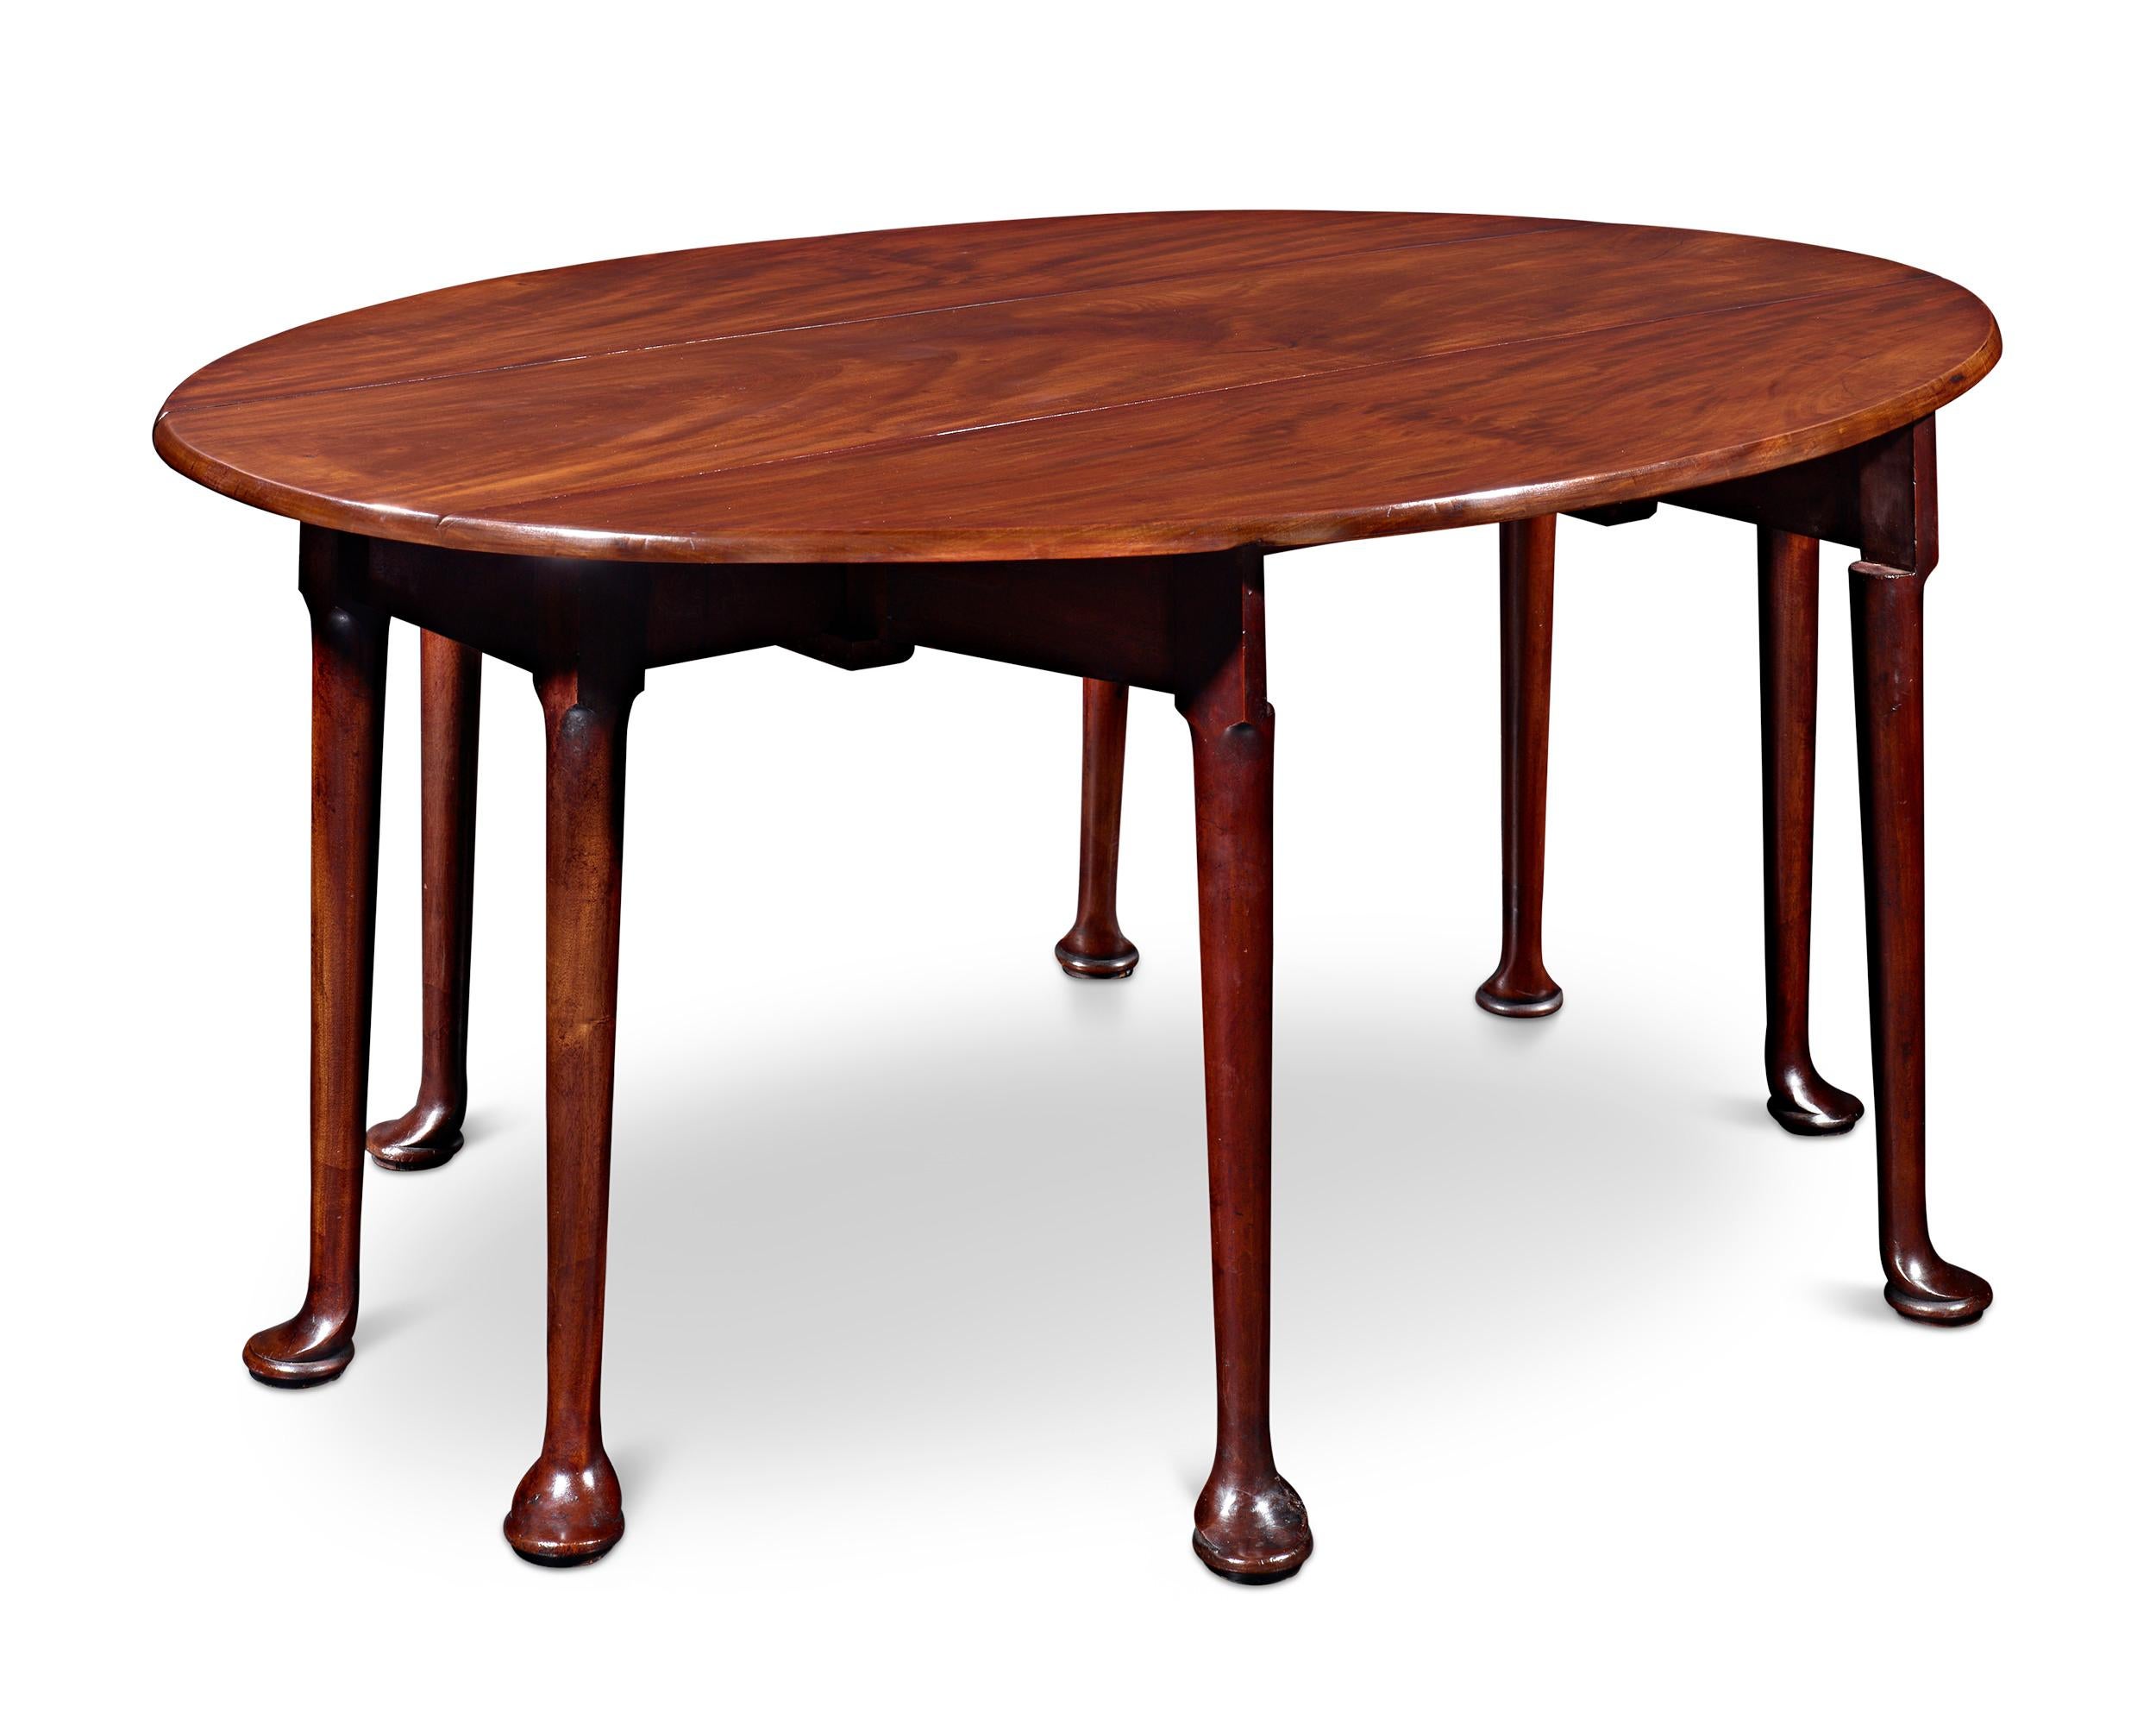 Both outstanding design and rich tradition set apart this intriguing Irish mahogany table. Often referred to as a “wake” table, this extra-long oval table would have once been used year-round as a dining table. Yet, it also served as the focal